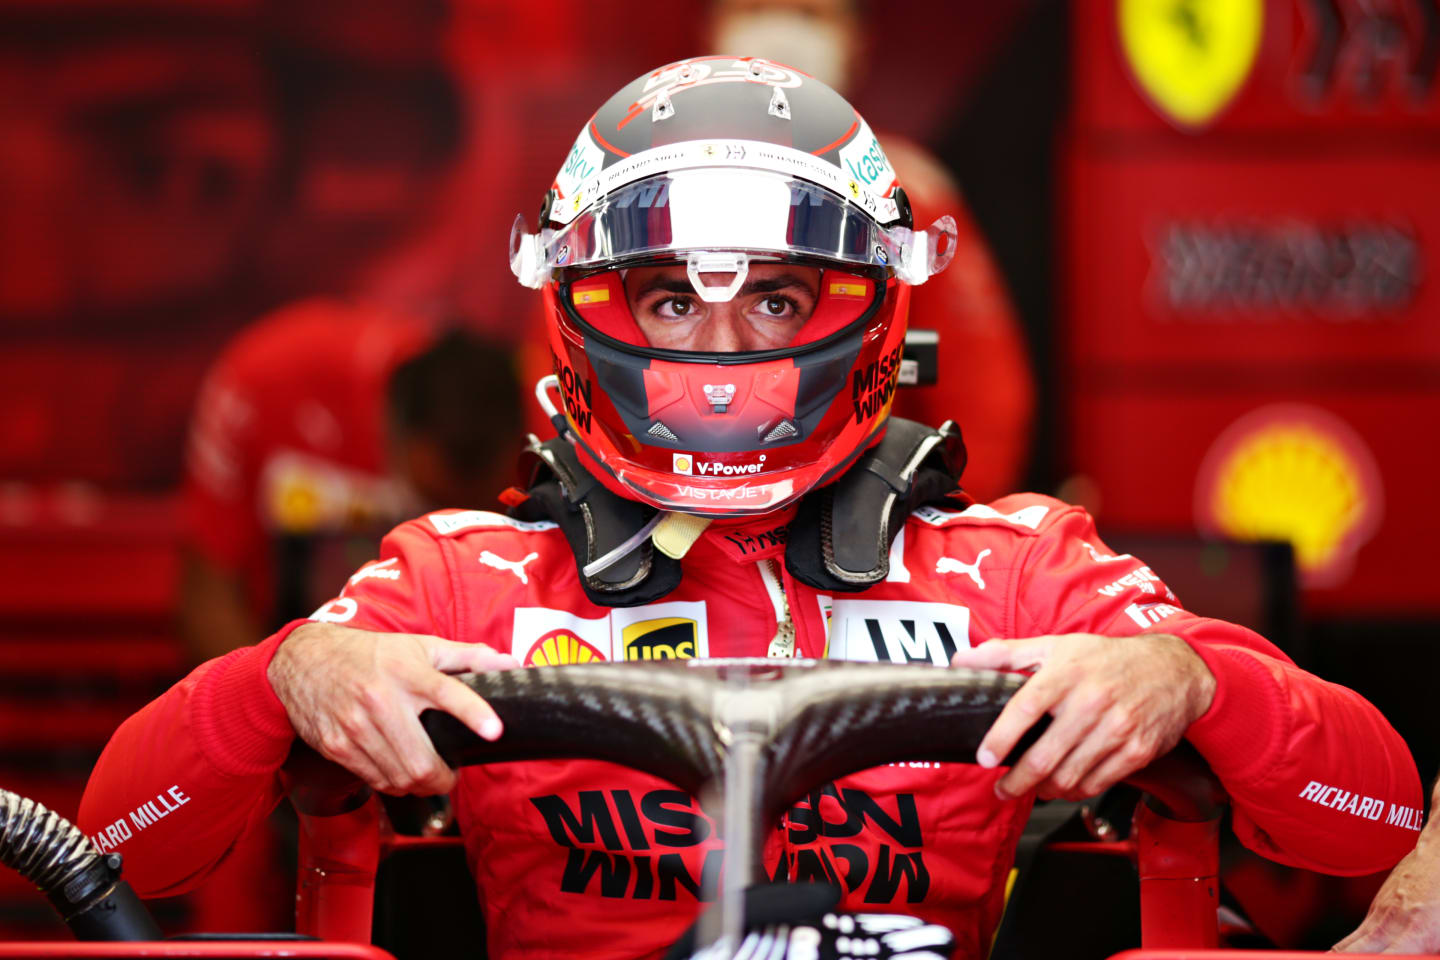 SAO PAULO, BRAZIL - NOVEMBER 14: Carlos Sainz of Spain and Ferrari prepares to drive in the garage before the F1 Grand Prix of Brazil at Autodromo Jose Carlos Pace on November 14, 2021 in Sao Paulo, Brazil. (Photo by Peter Fox/Getty Images)